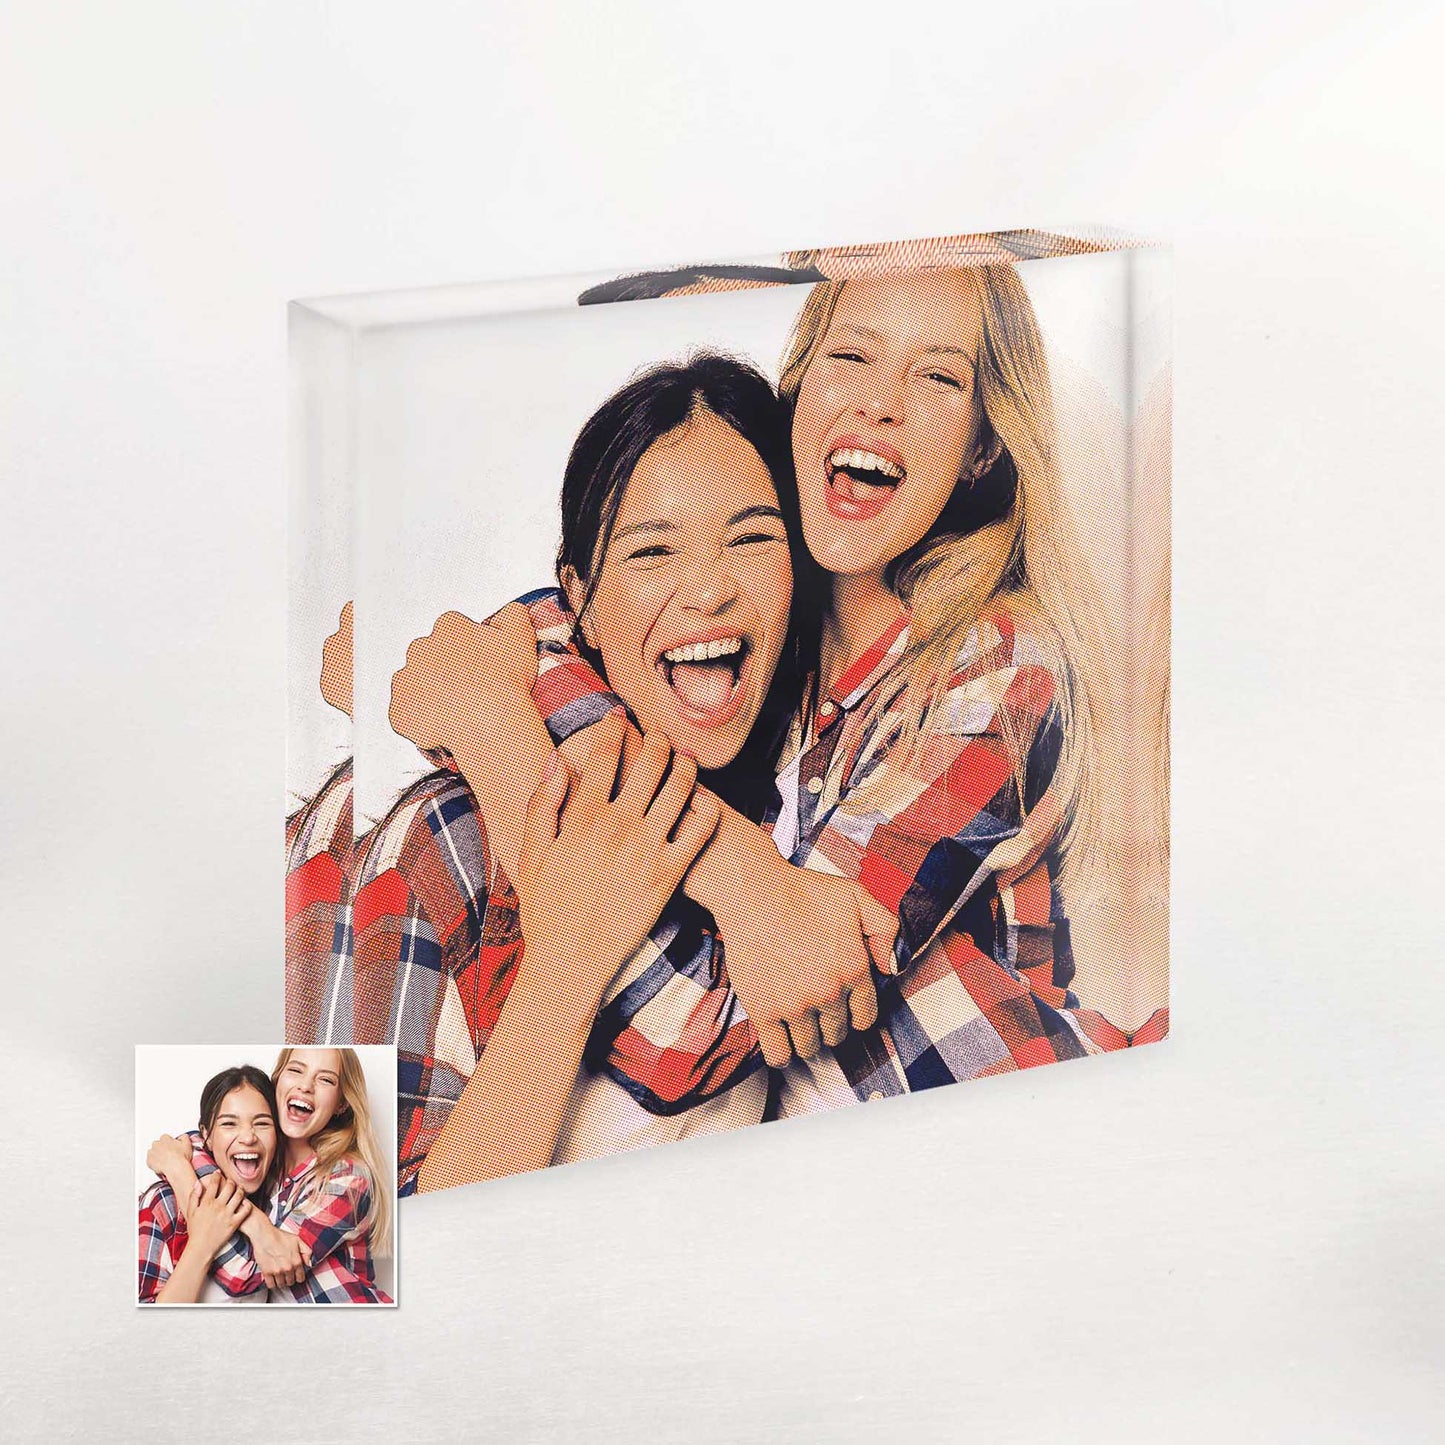 Unlock the creativity of your memories with our Personalised Retro Cartoon Filter Acrylic Block Photo. Its fun and nostalgic design turns your photo into an original artwork, making it a unique and creative gift that evokes a sense of joy and nostalgia.